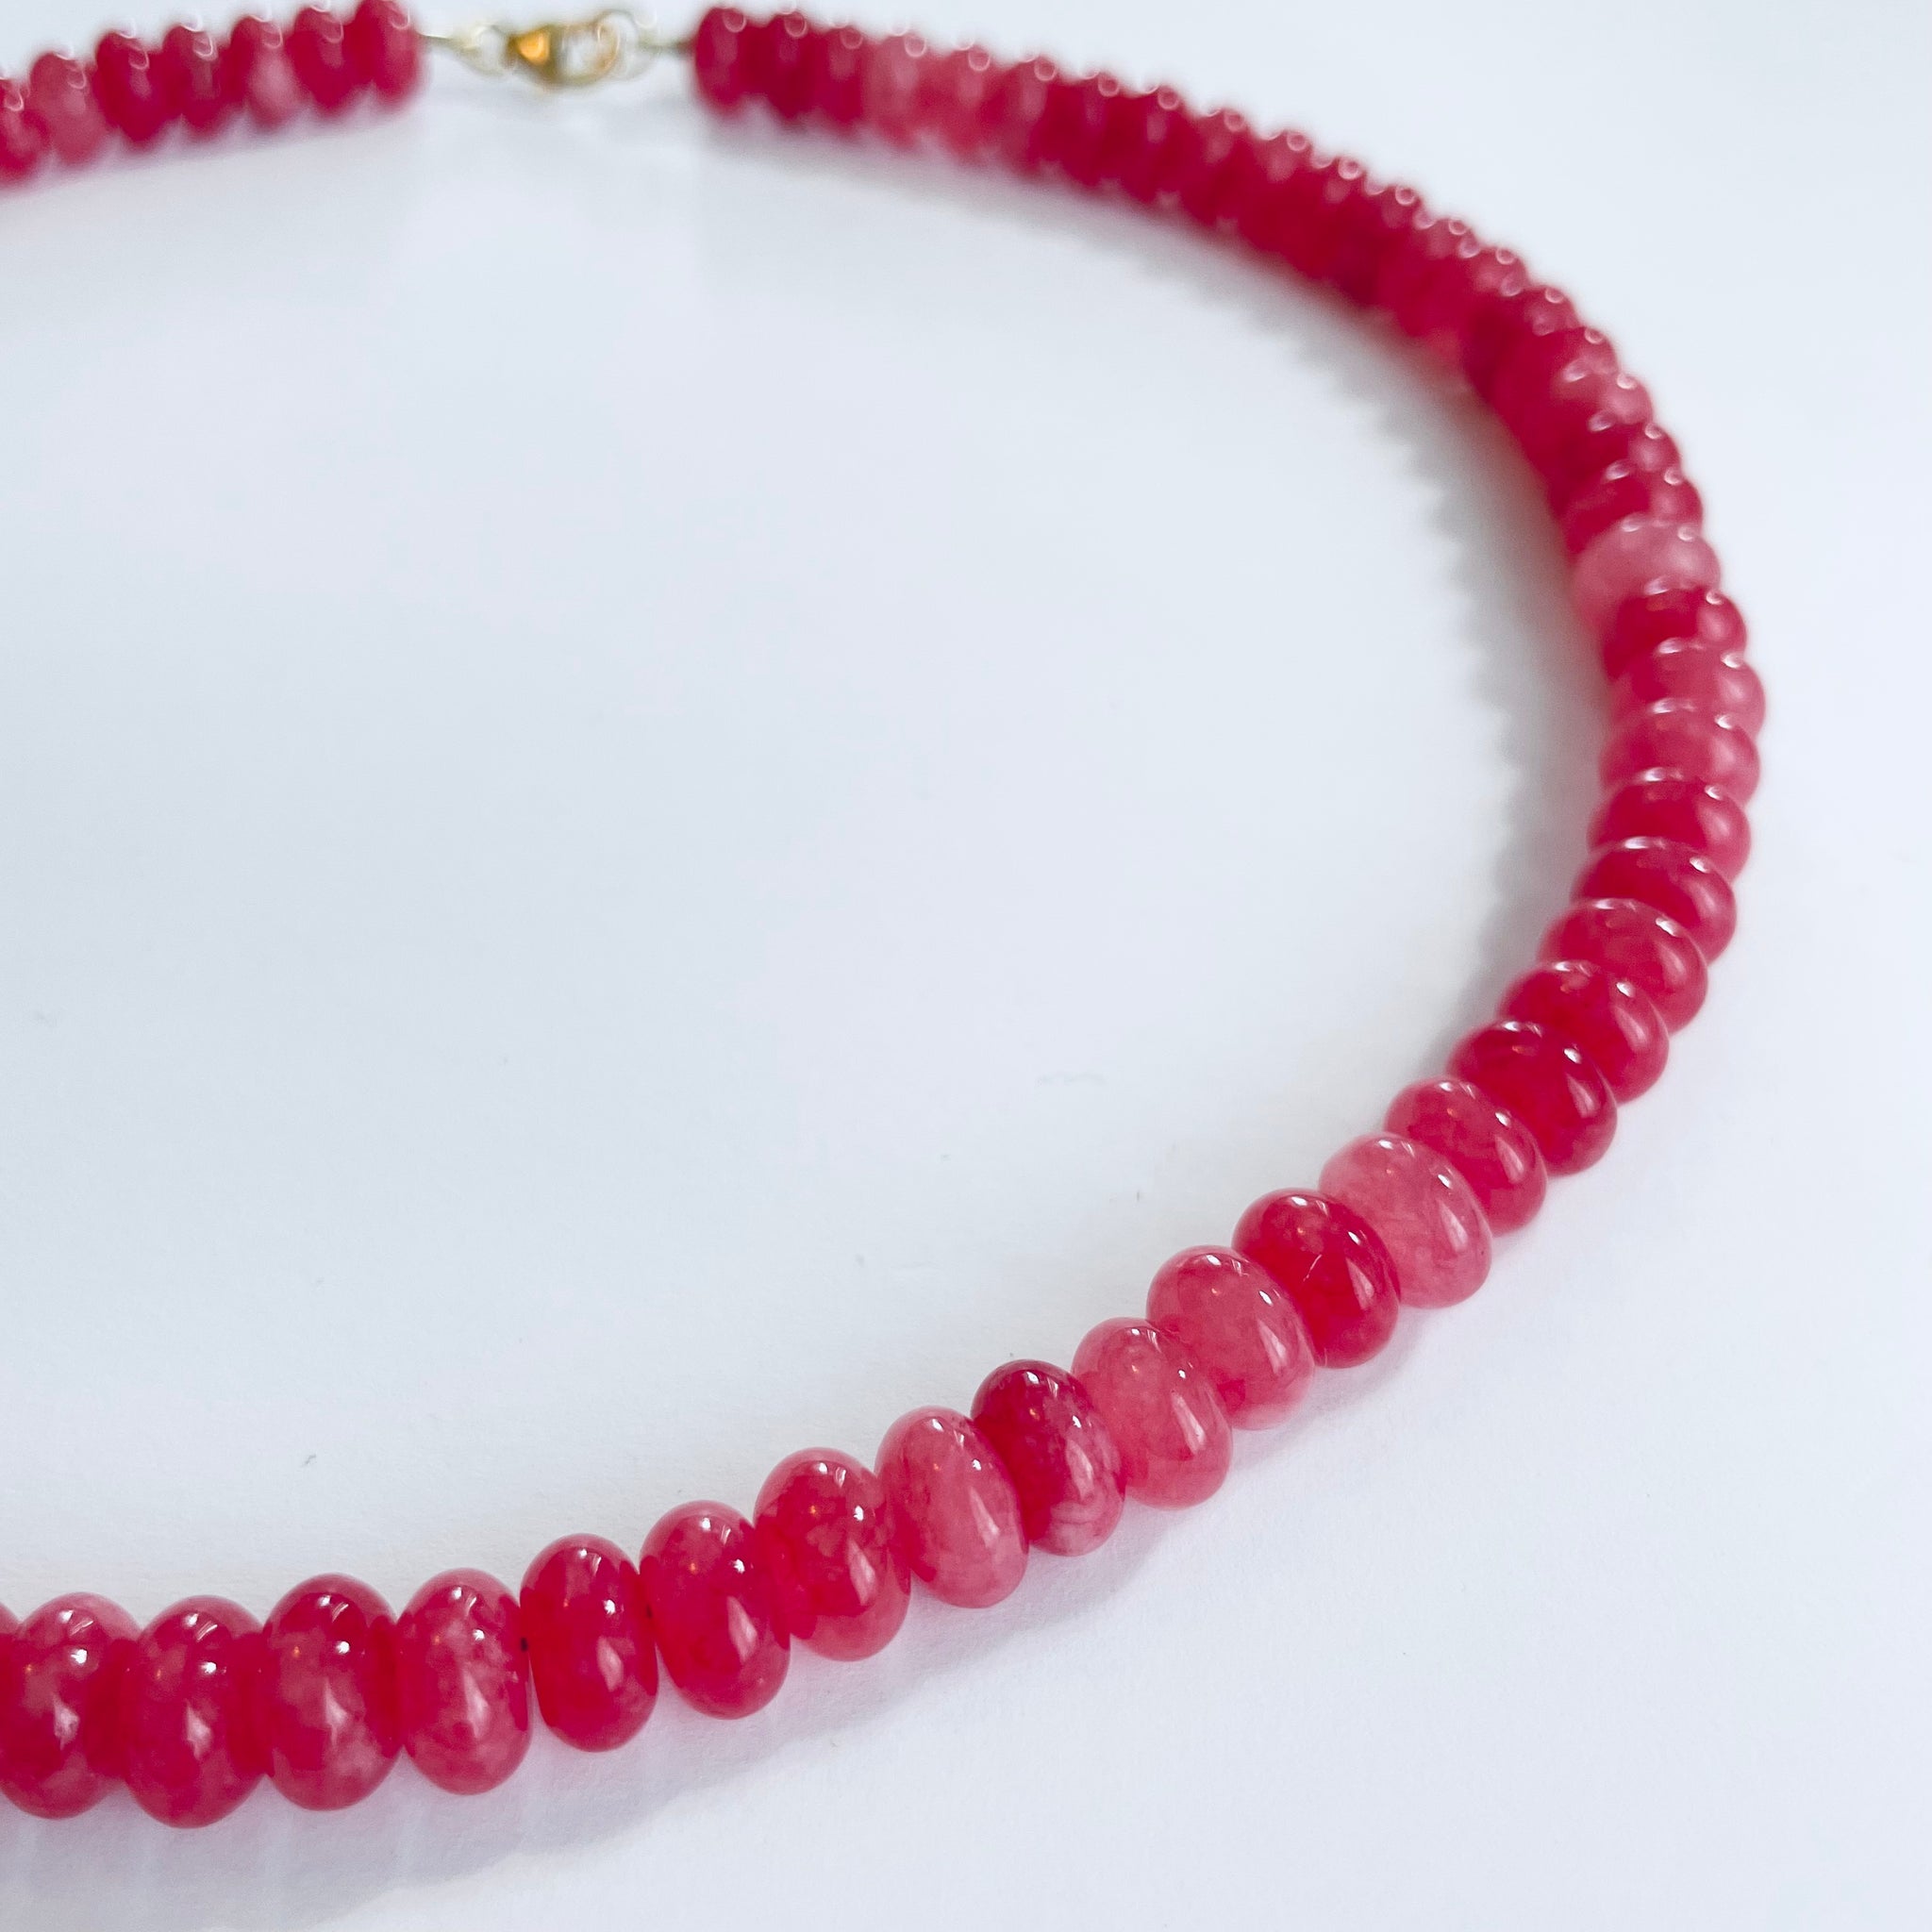 salmon angelite candy necklace